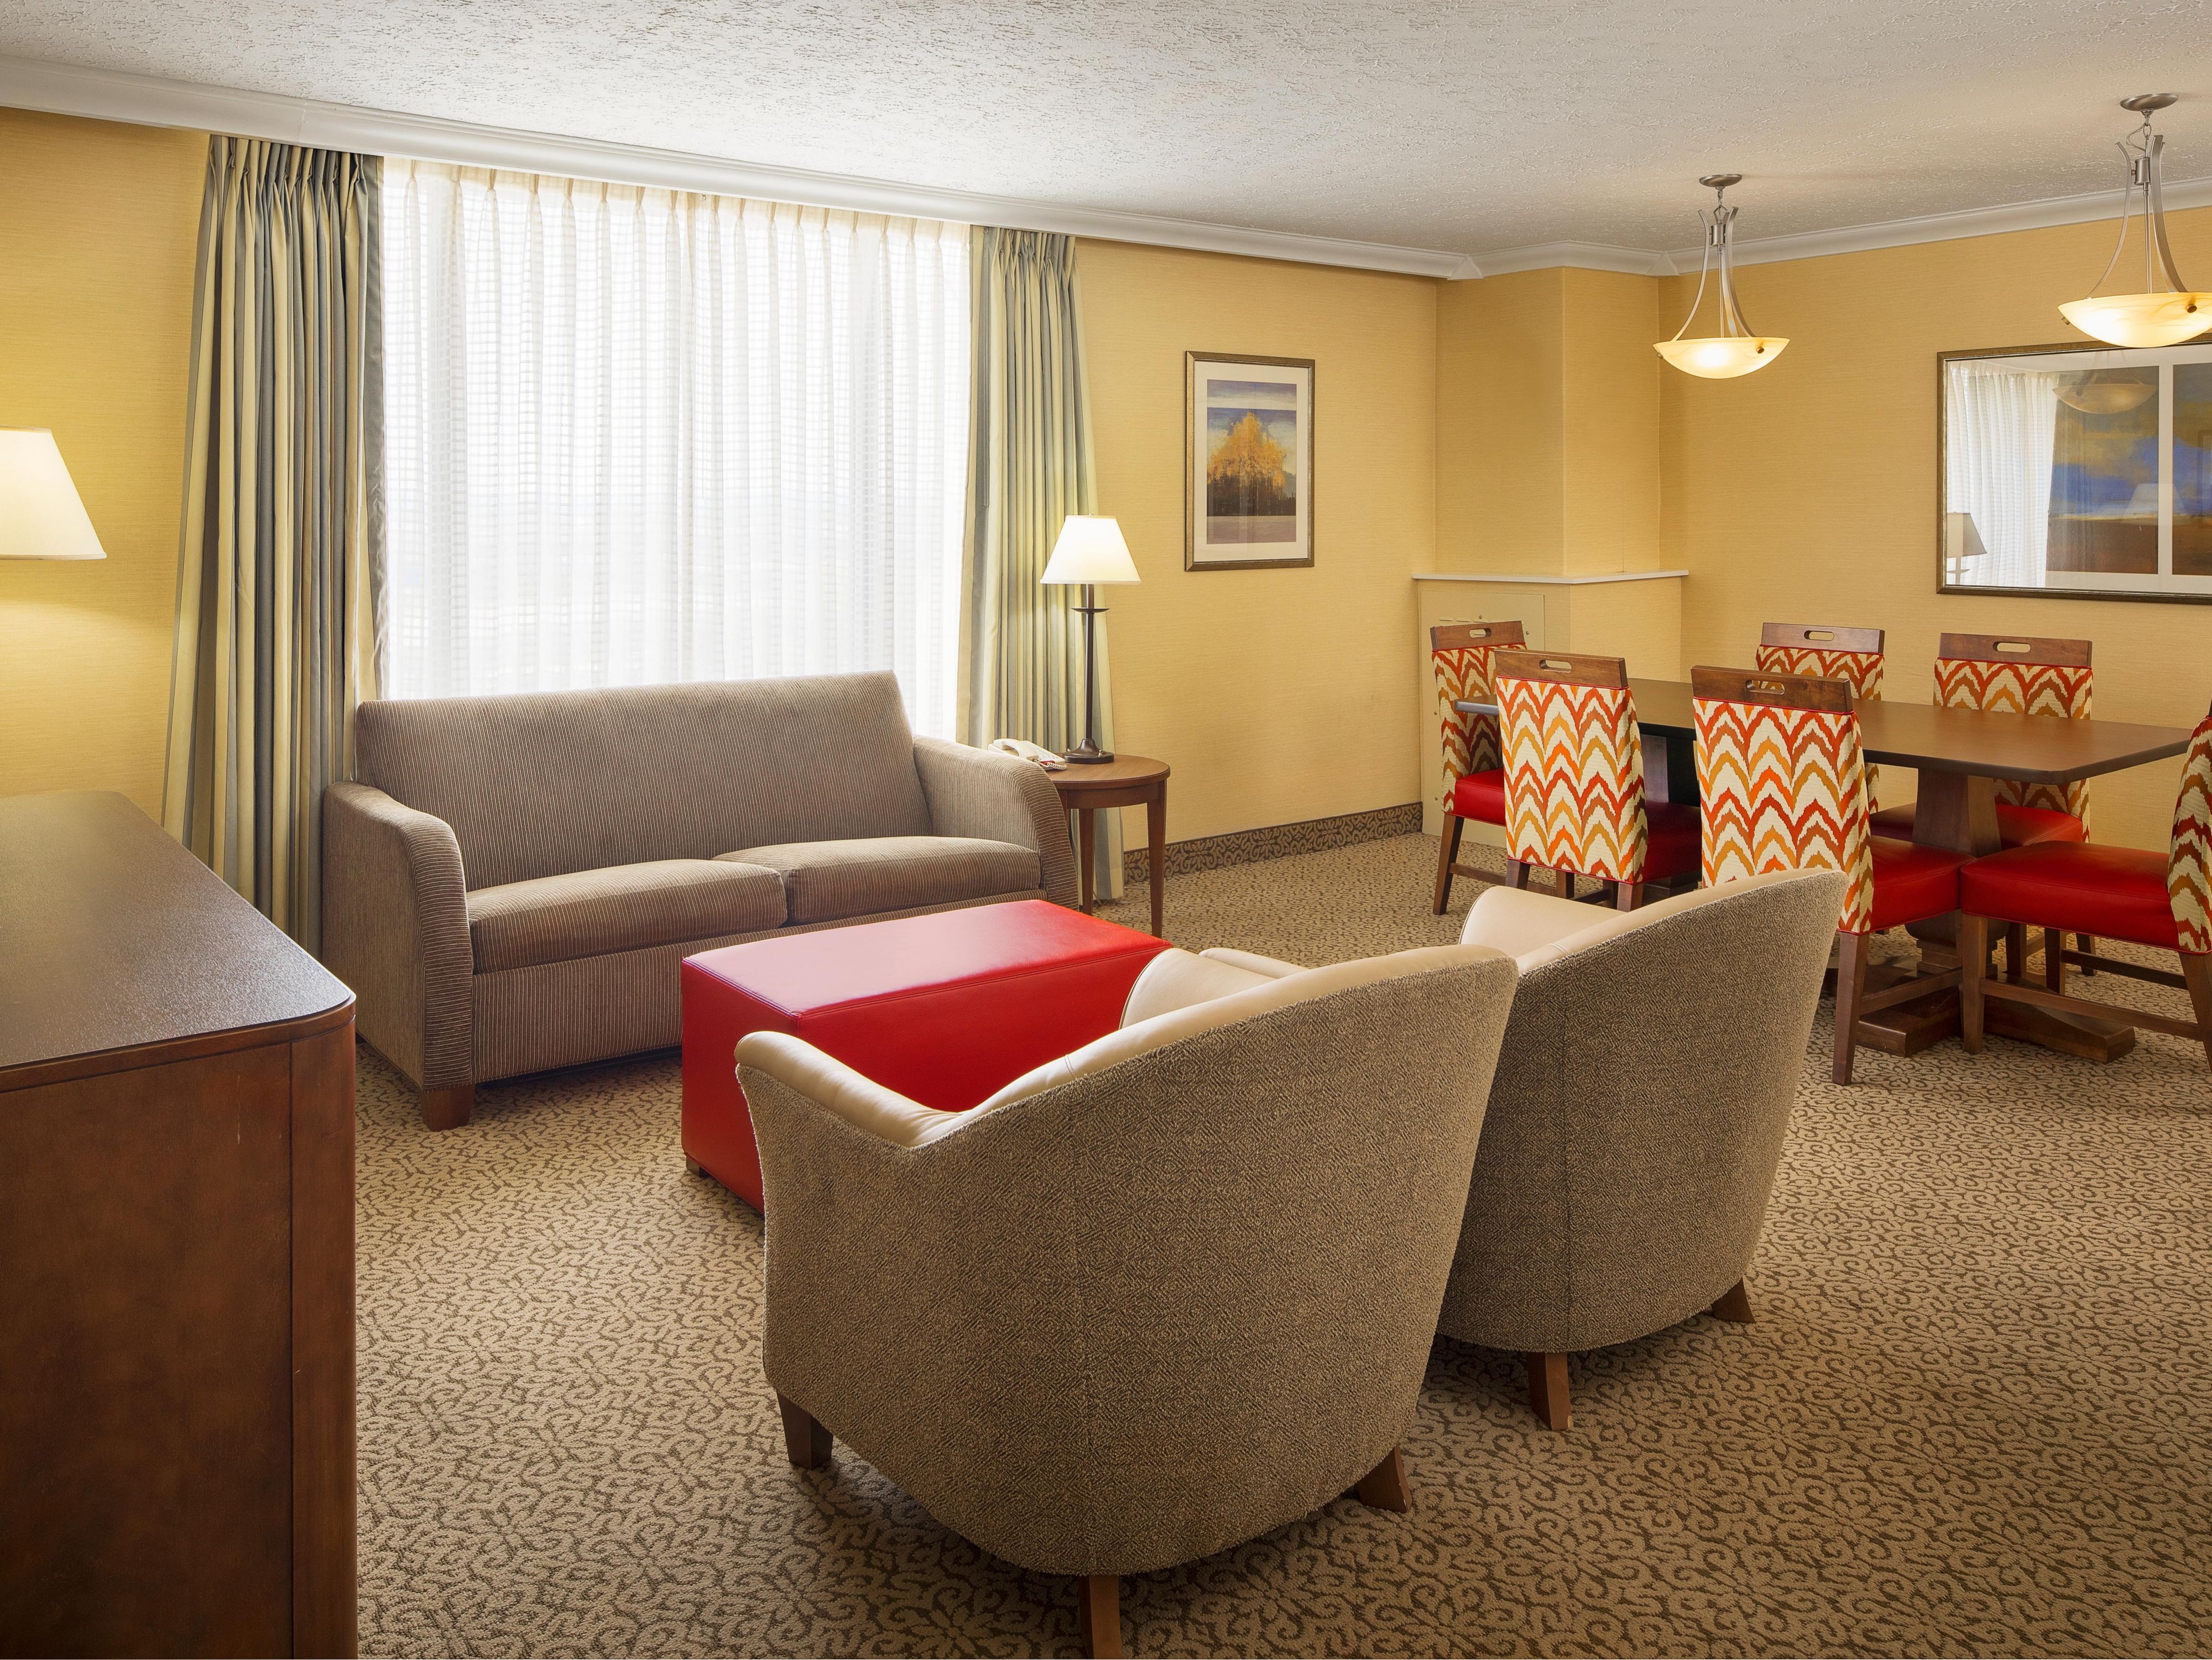 Choose from a variety of spacious one and two- bedroom suites for extra comfort and convenience during your stay. Whether you are hosting a hospitality event, need a separate room for small meetings or work space, or are looking for something special for that romantic getaway, Crowne Plaza Louisville Expo ctr. has a suite that will fit your needs.